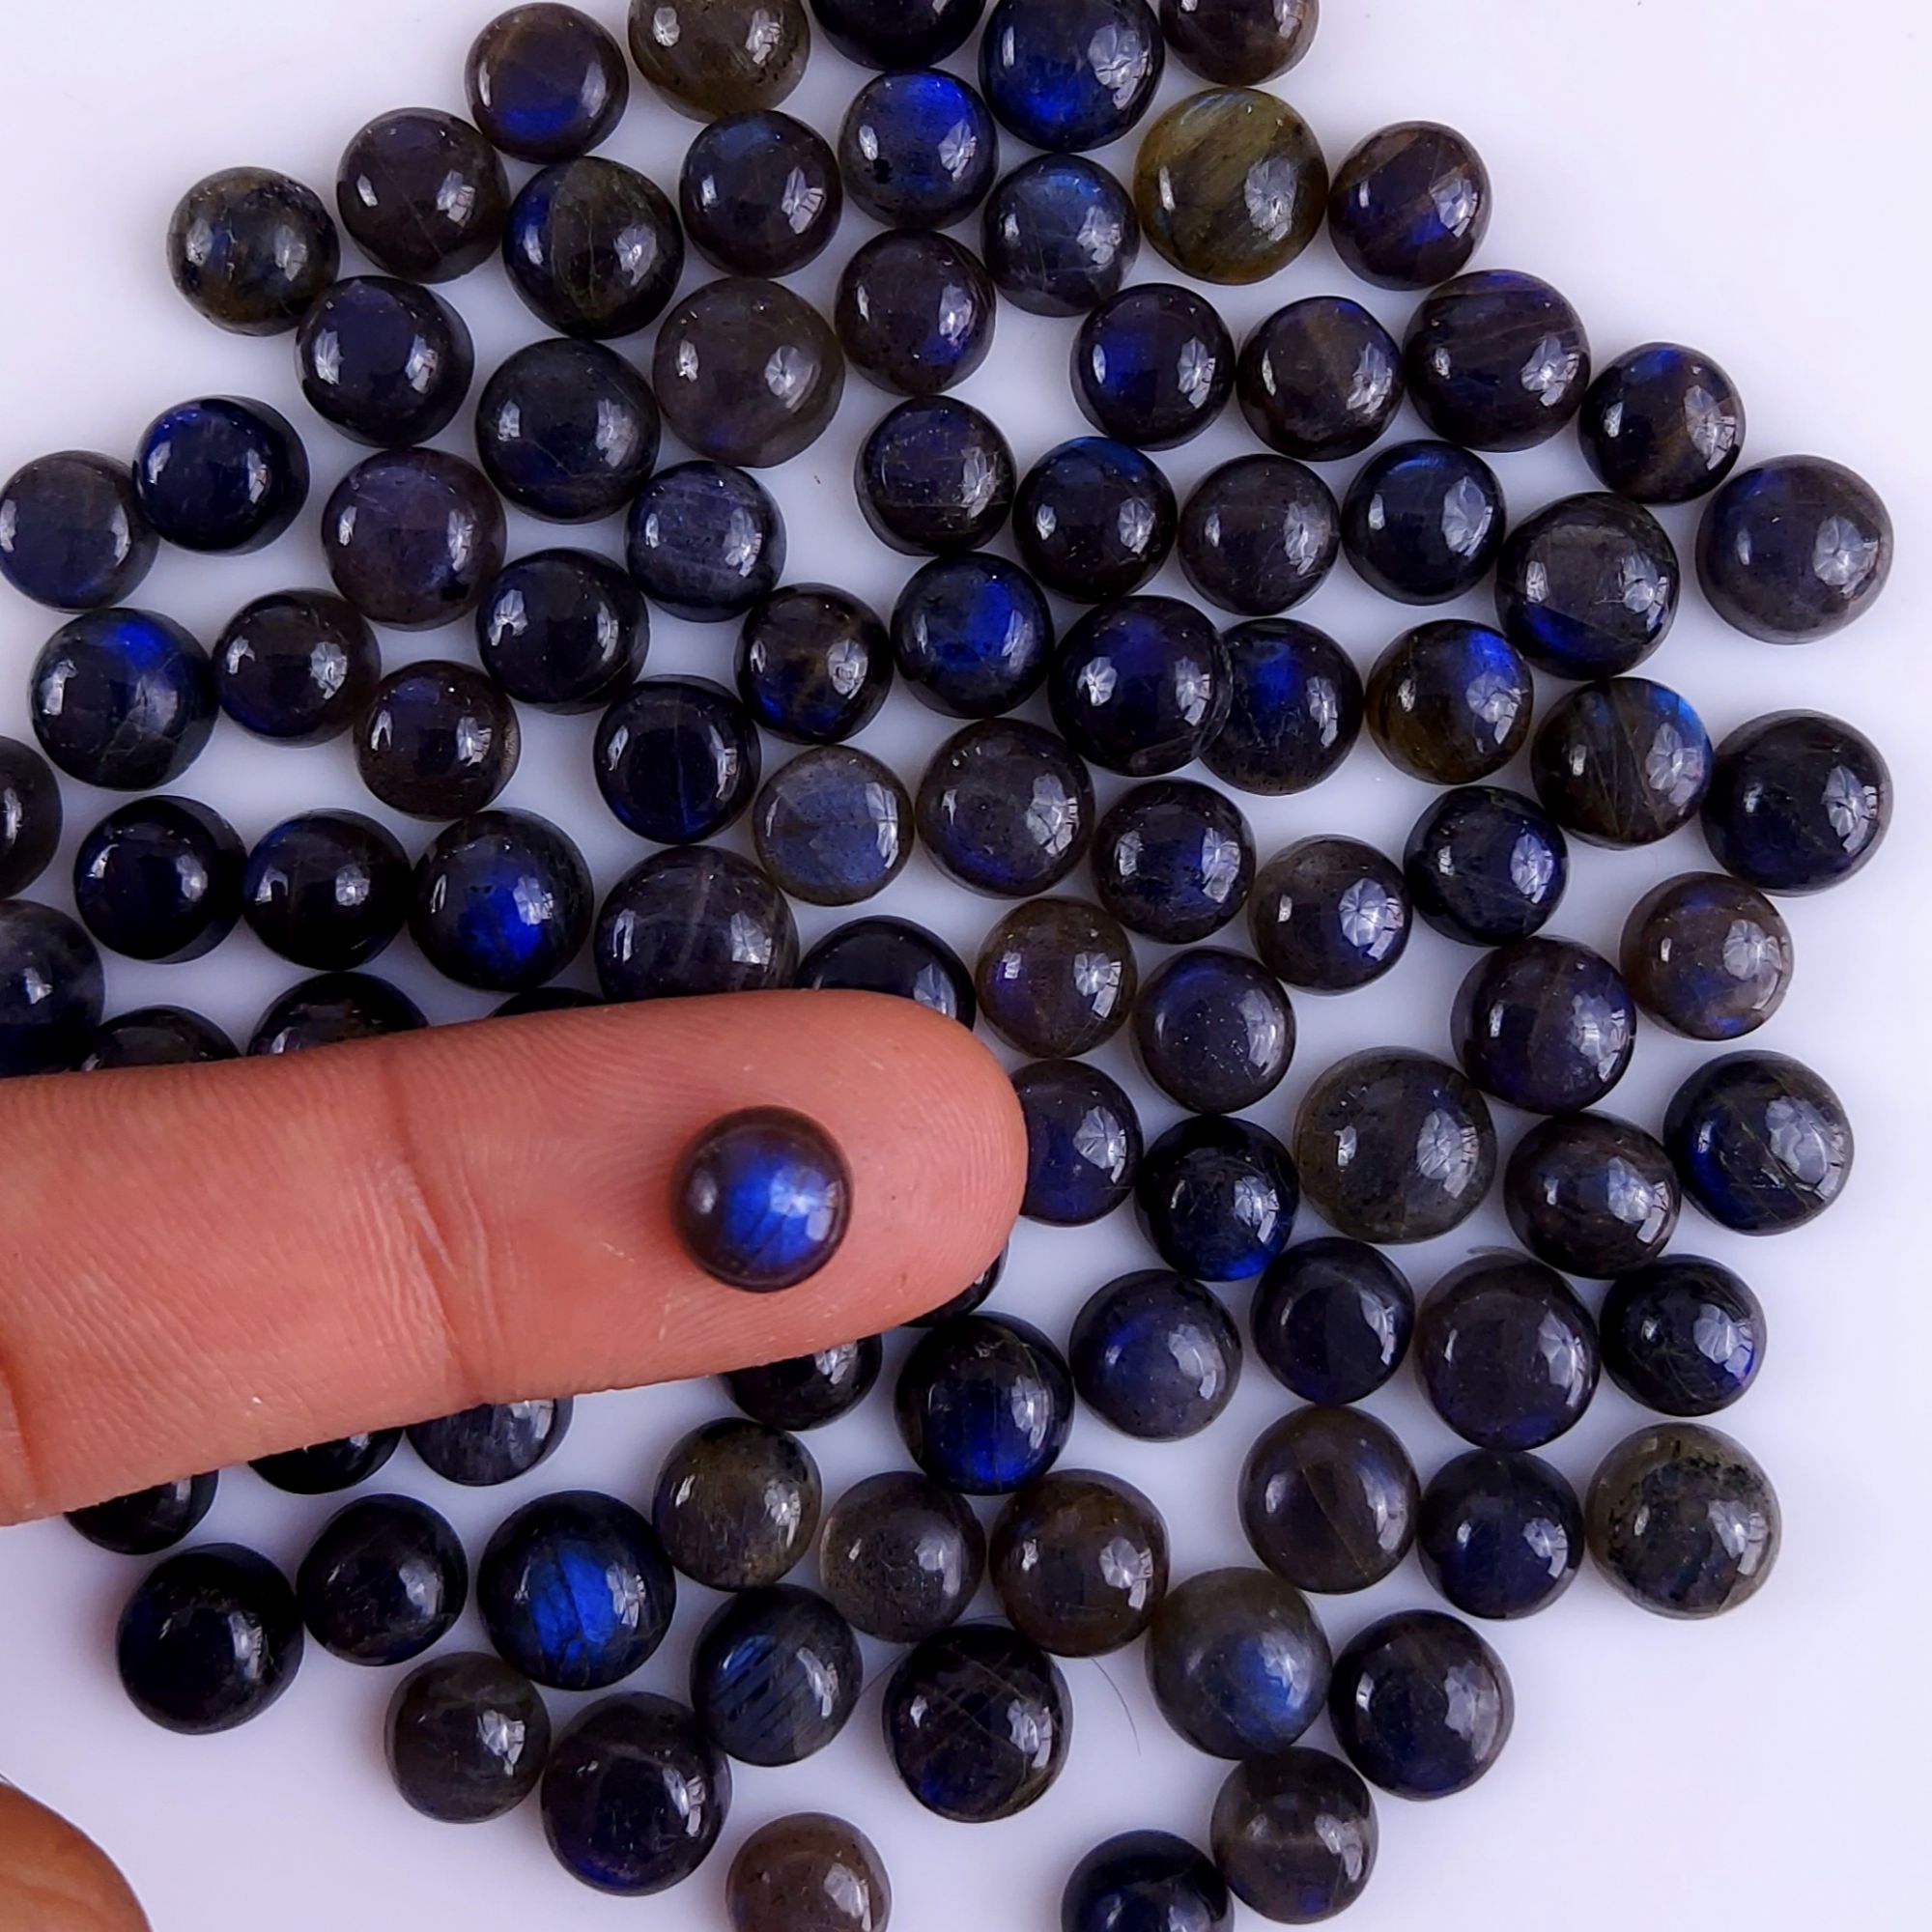 100Pcs 274Cts Natural Blue Labradorite Calibrated Cabochon Round Shape Gemstone Lot For Jewelry Making 6x6mm#748